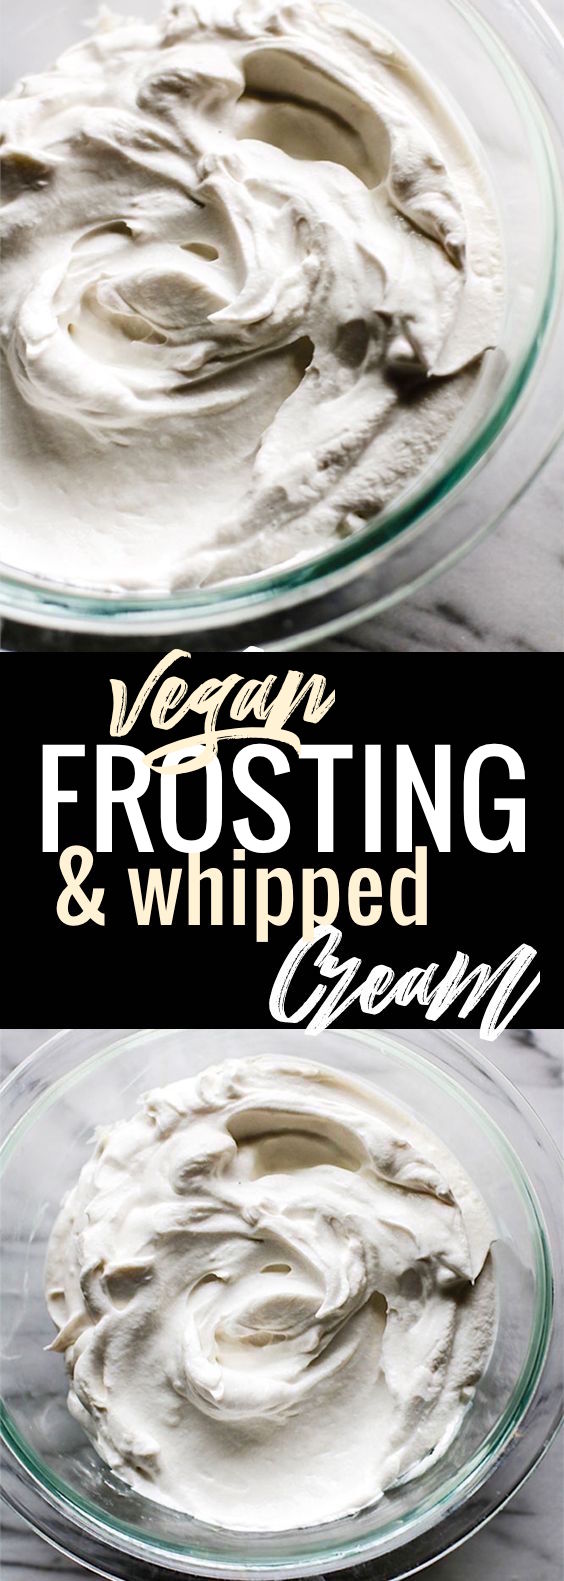 Coconut Cream Vegan Frosting Paleo Option Cotter Crunch,Diy 10th Anniversary Gifts For Him